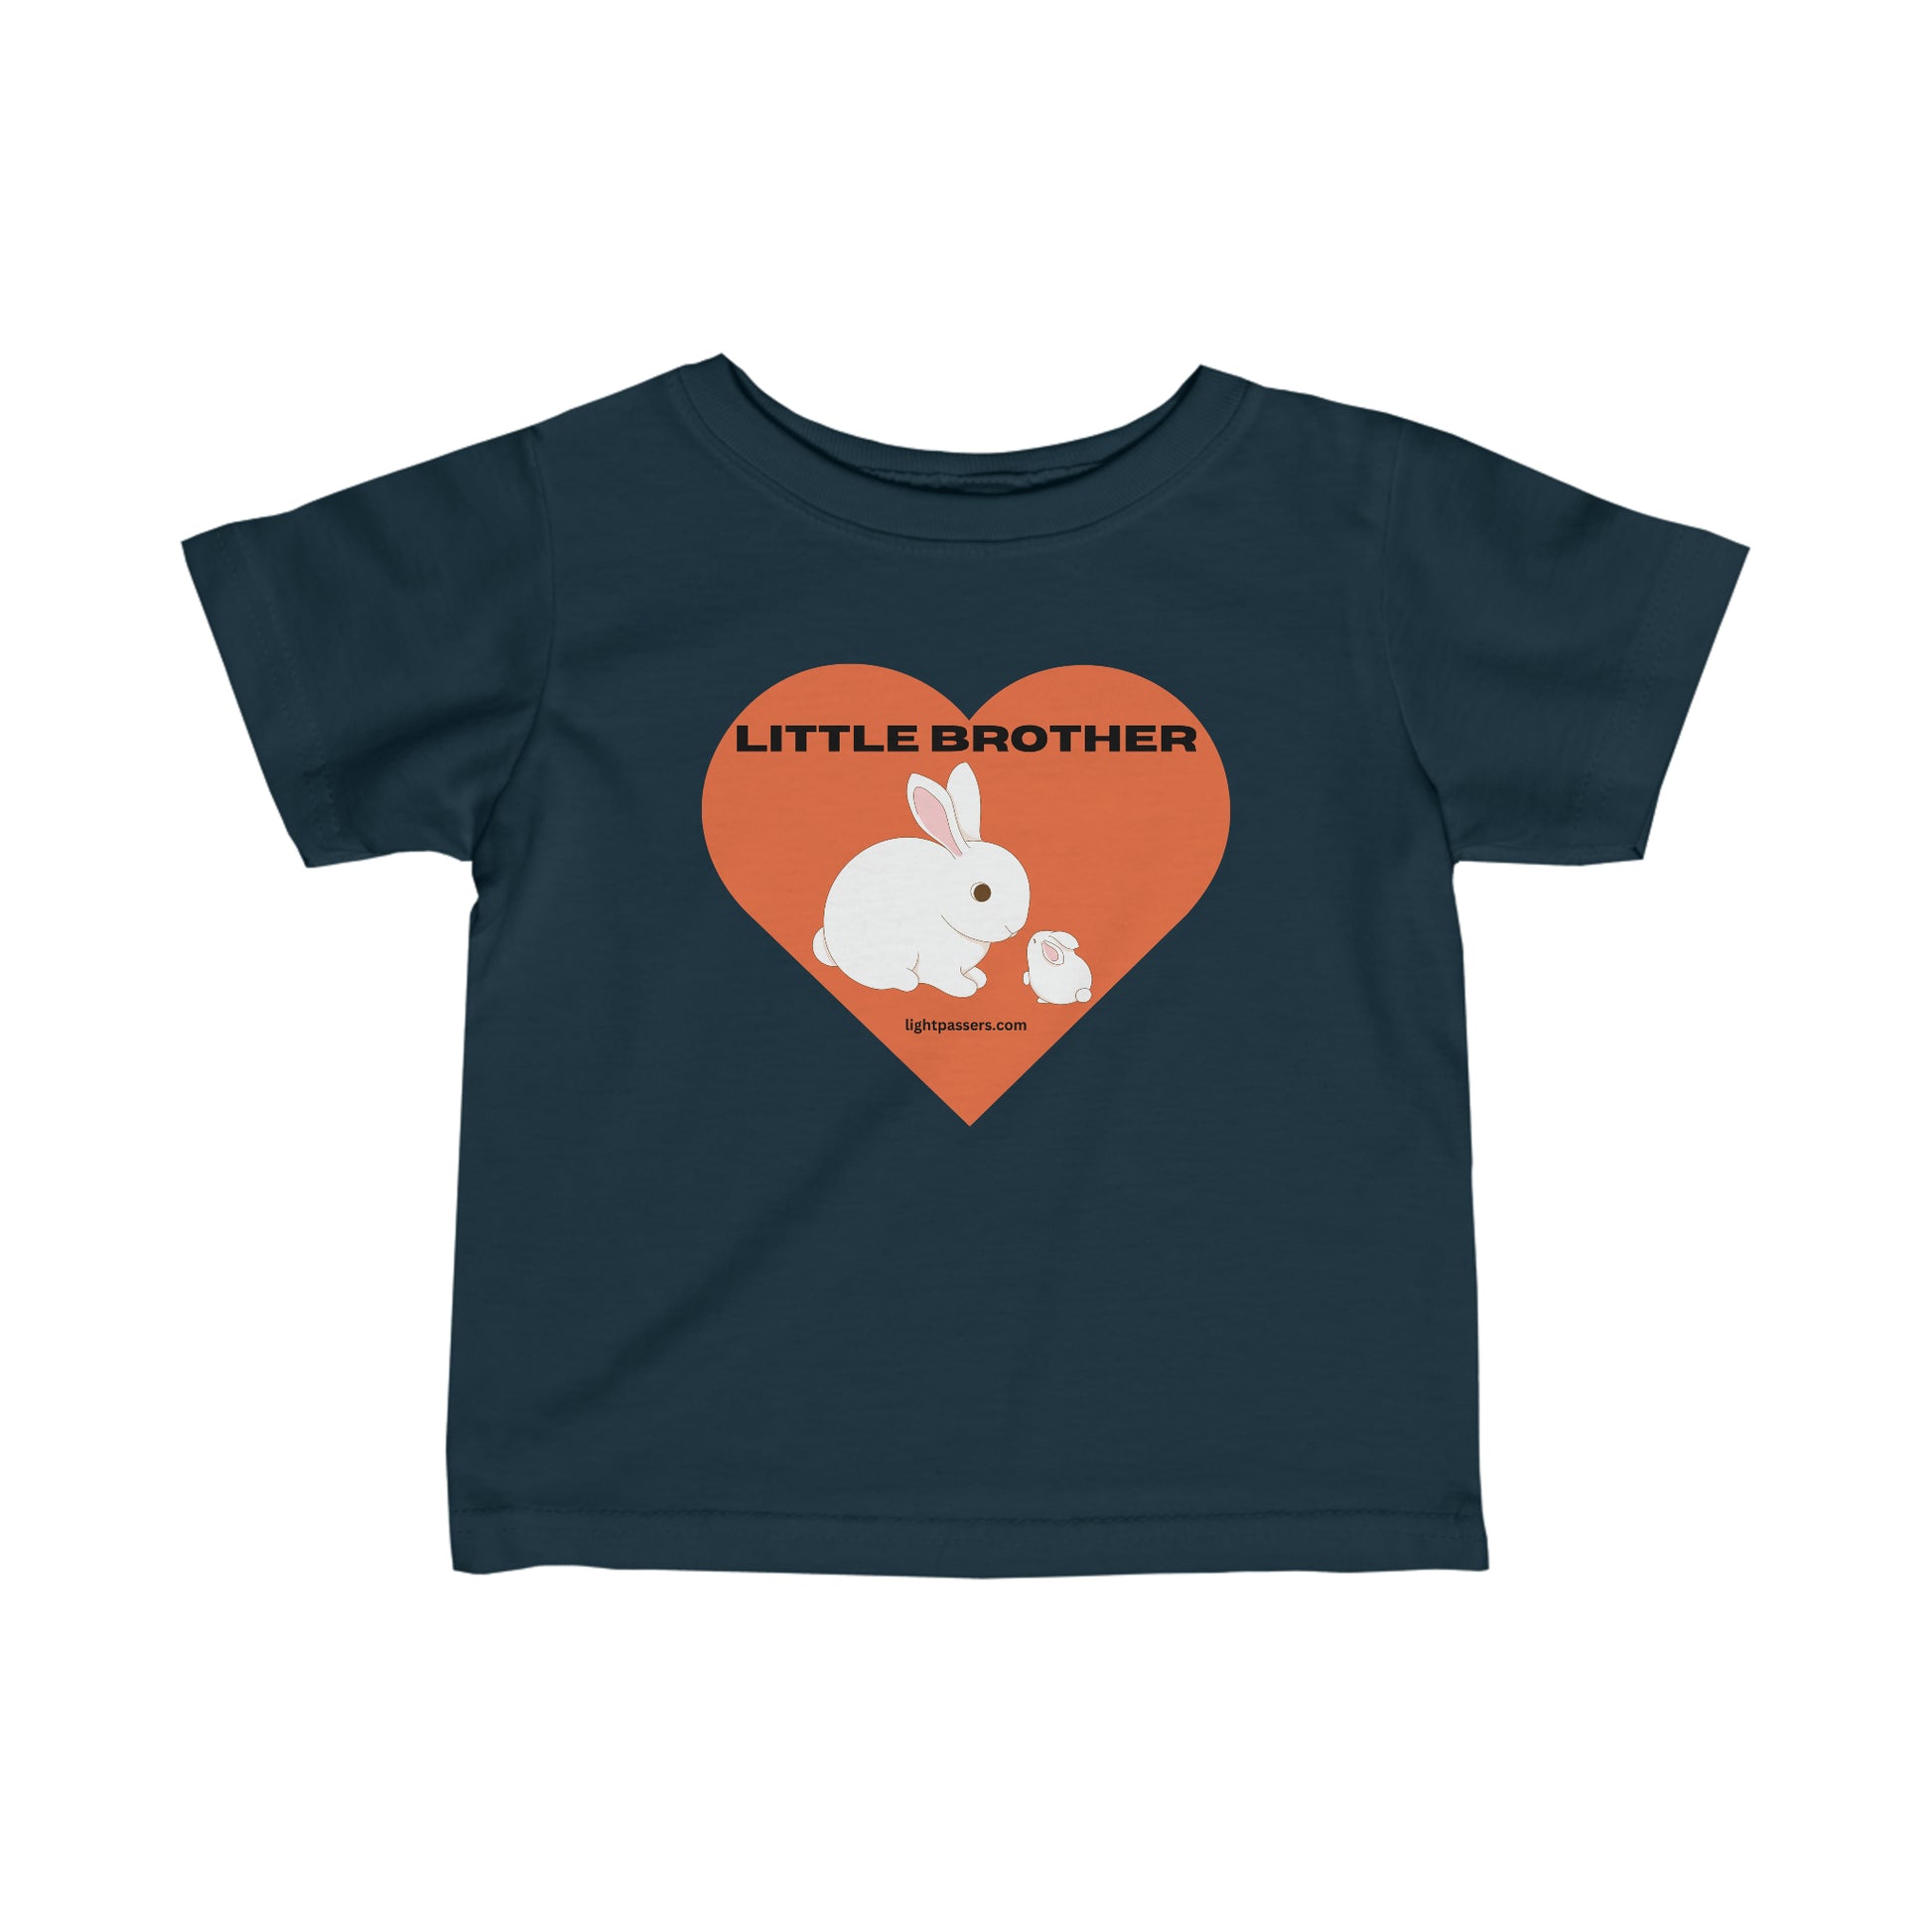 A Little Brother Baby T-shirt with a white rabbit and heart design on blue fabric. Infant tee with side seams, ribbed knitting, and taped shoulders for durability and comfort.